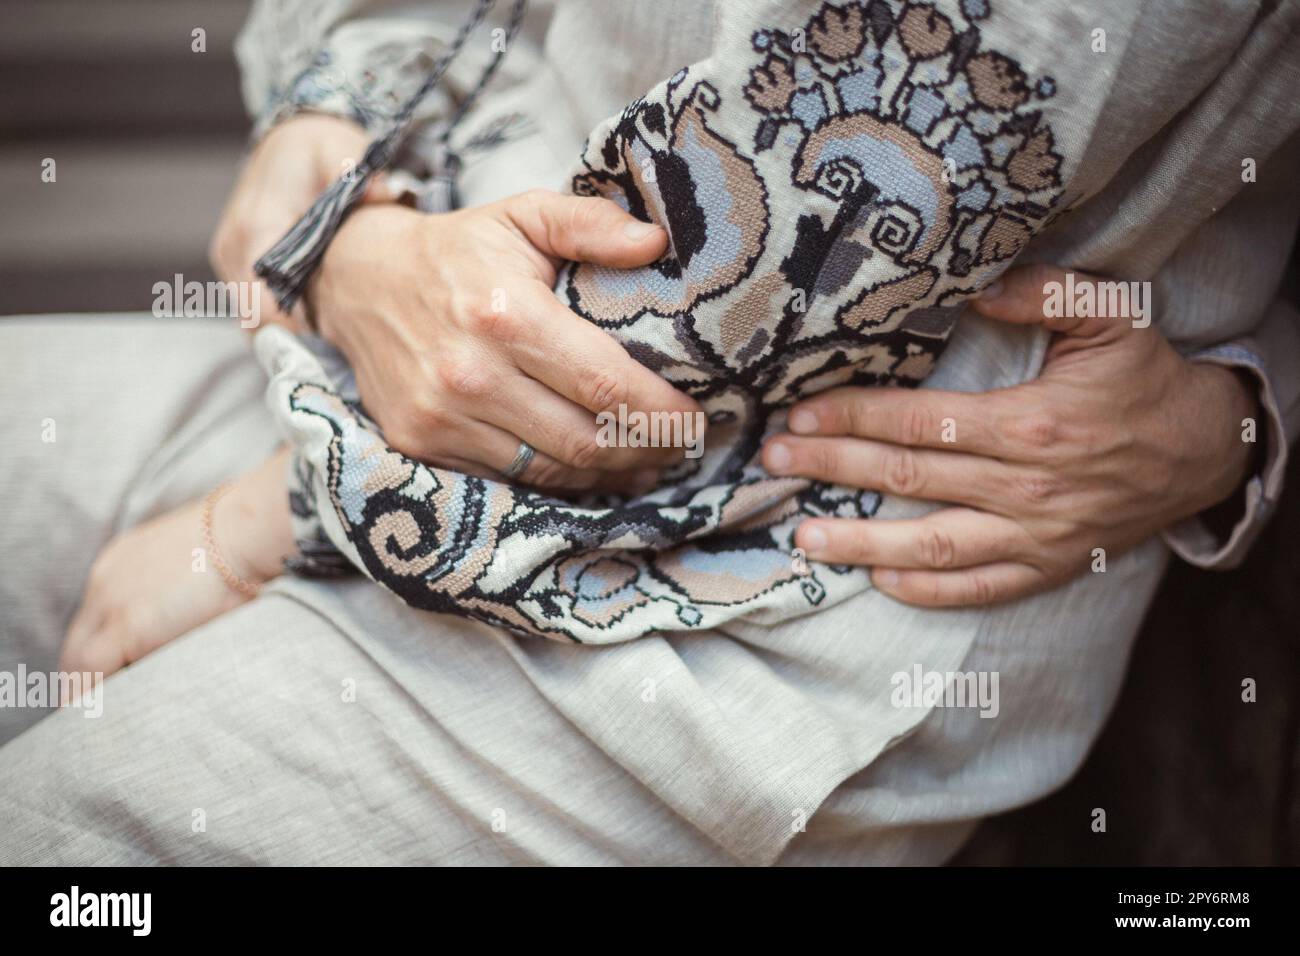 Close up tender embrace concept photo Stock Photo